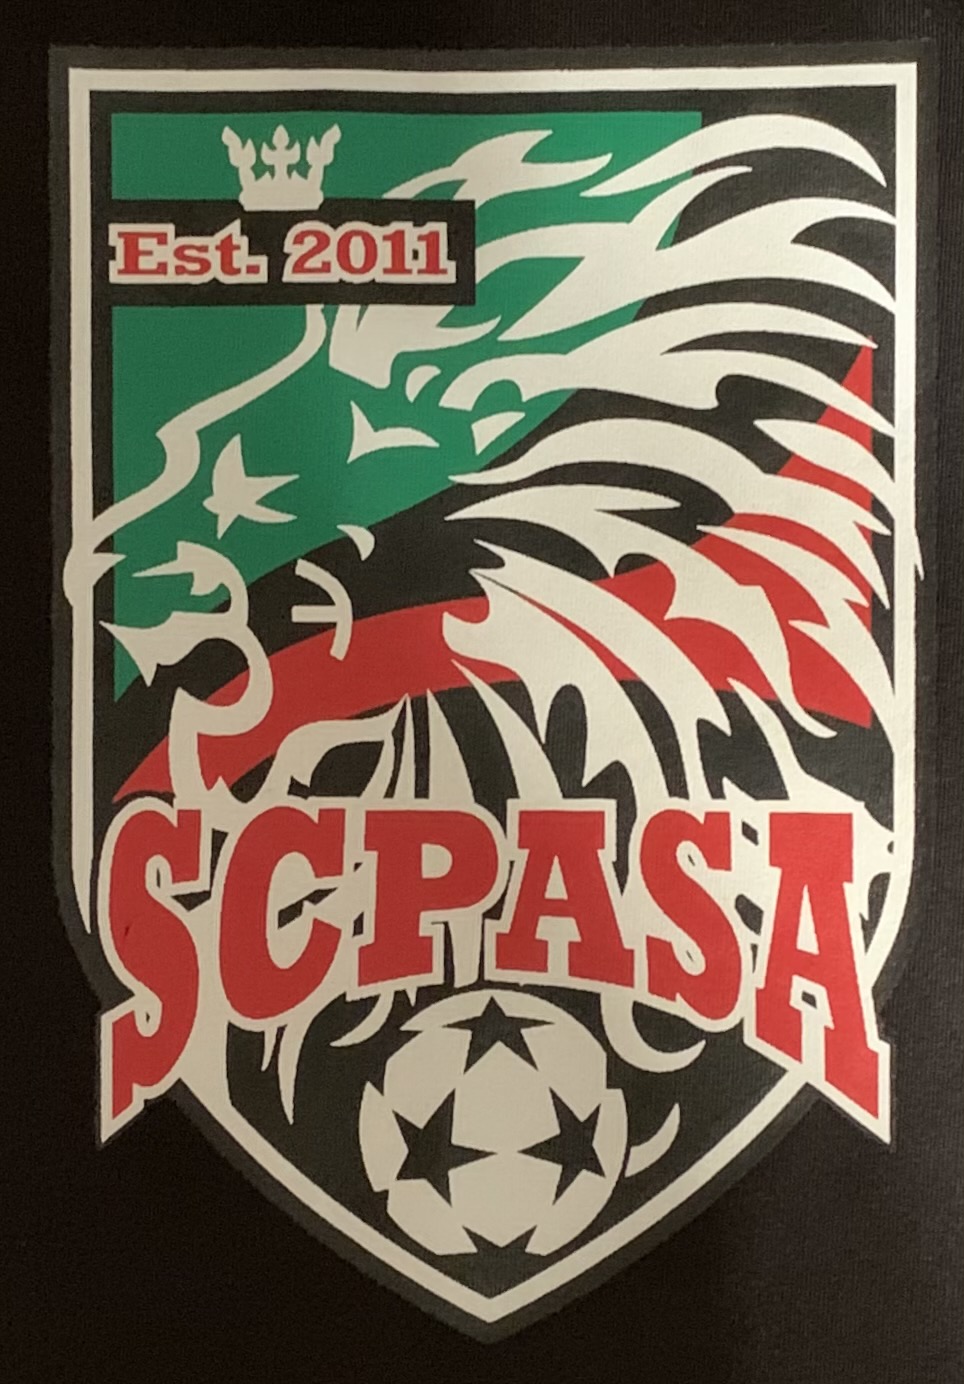 South Central Pa Soccer Academy team badge